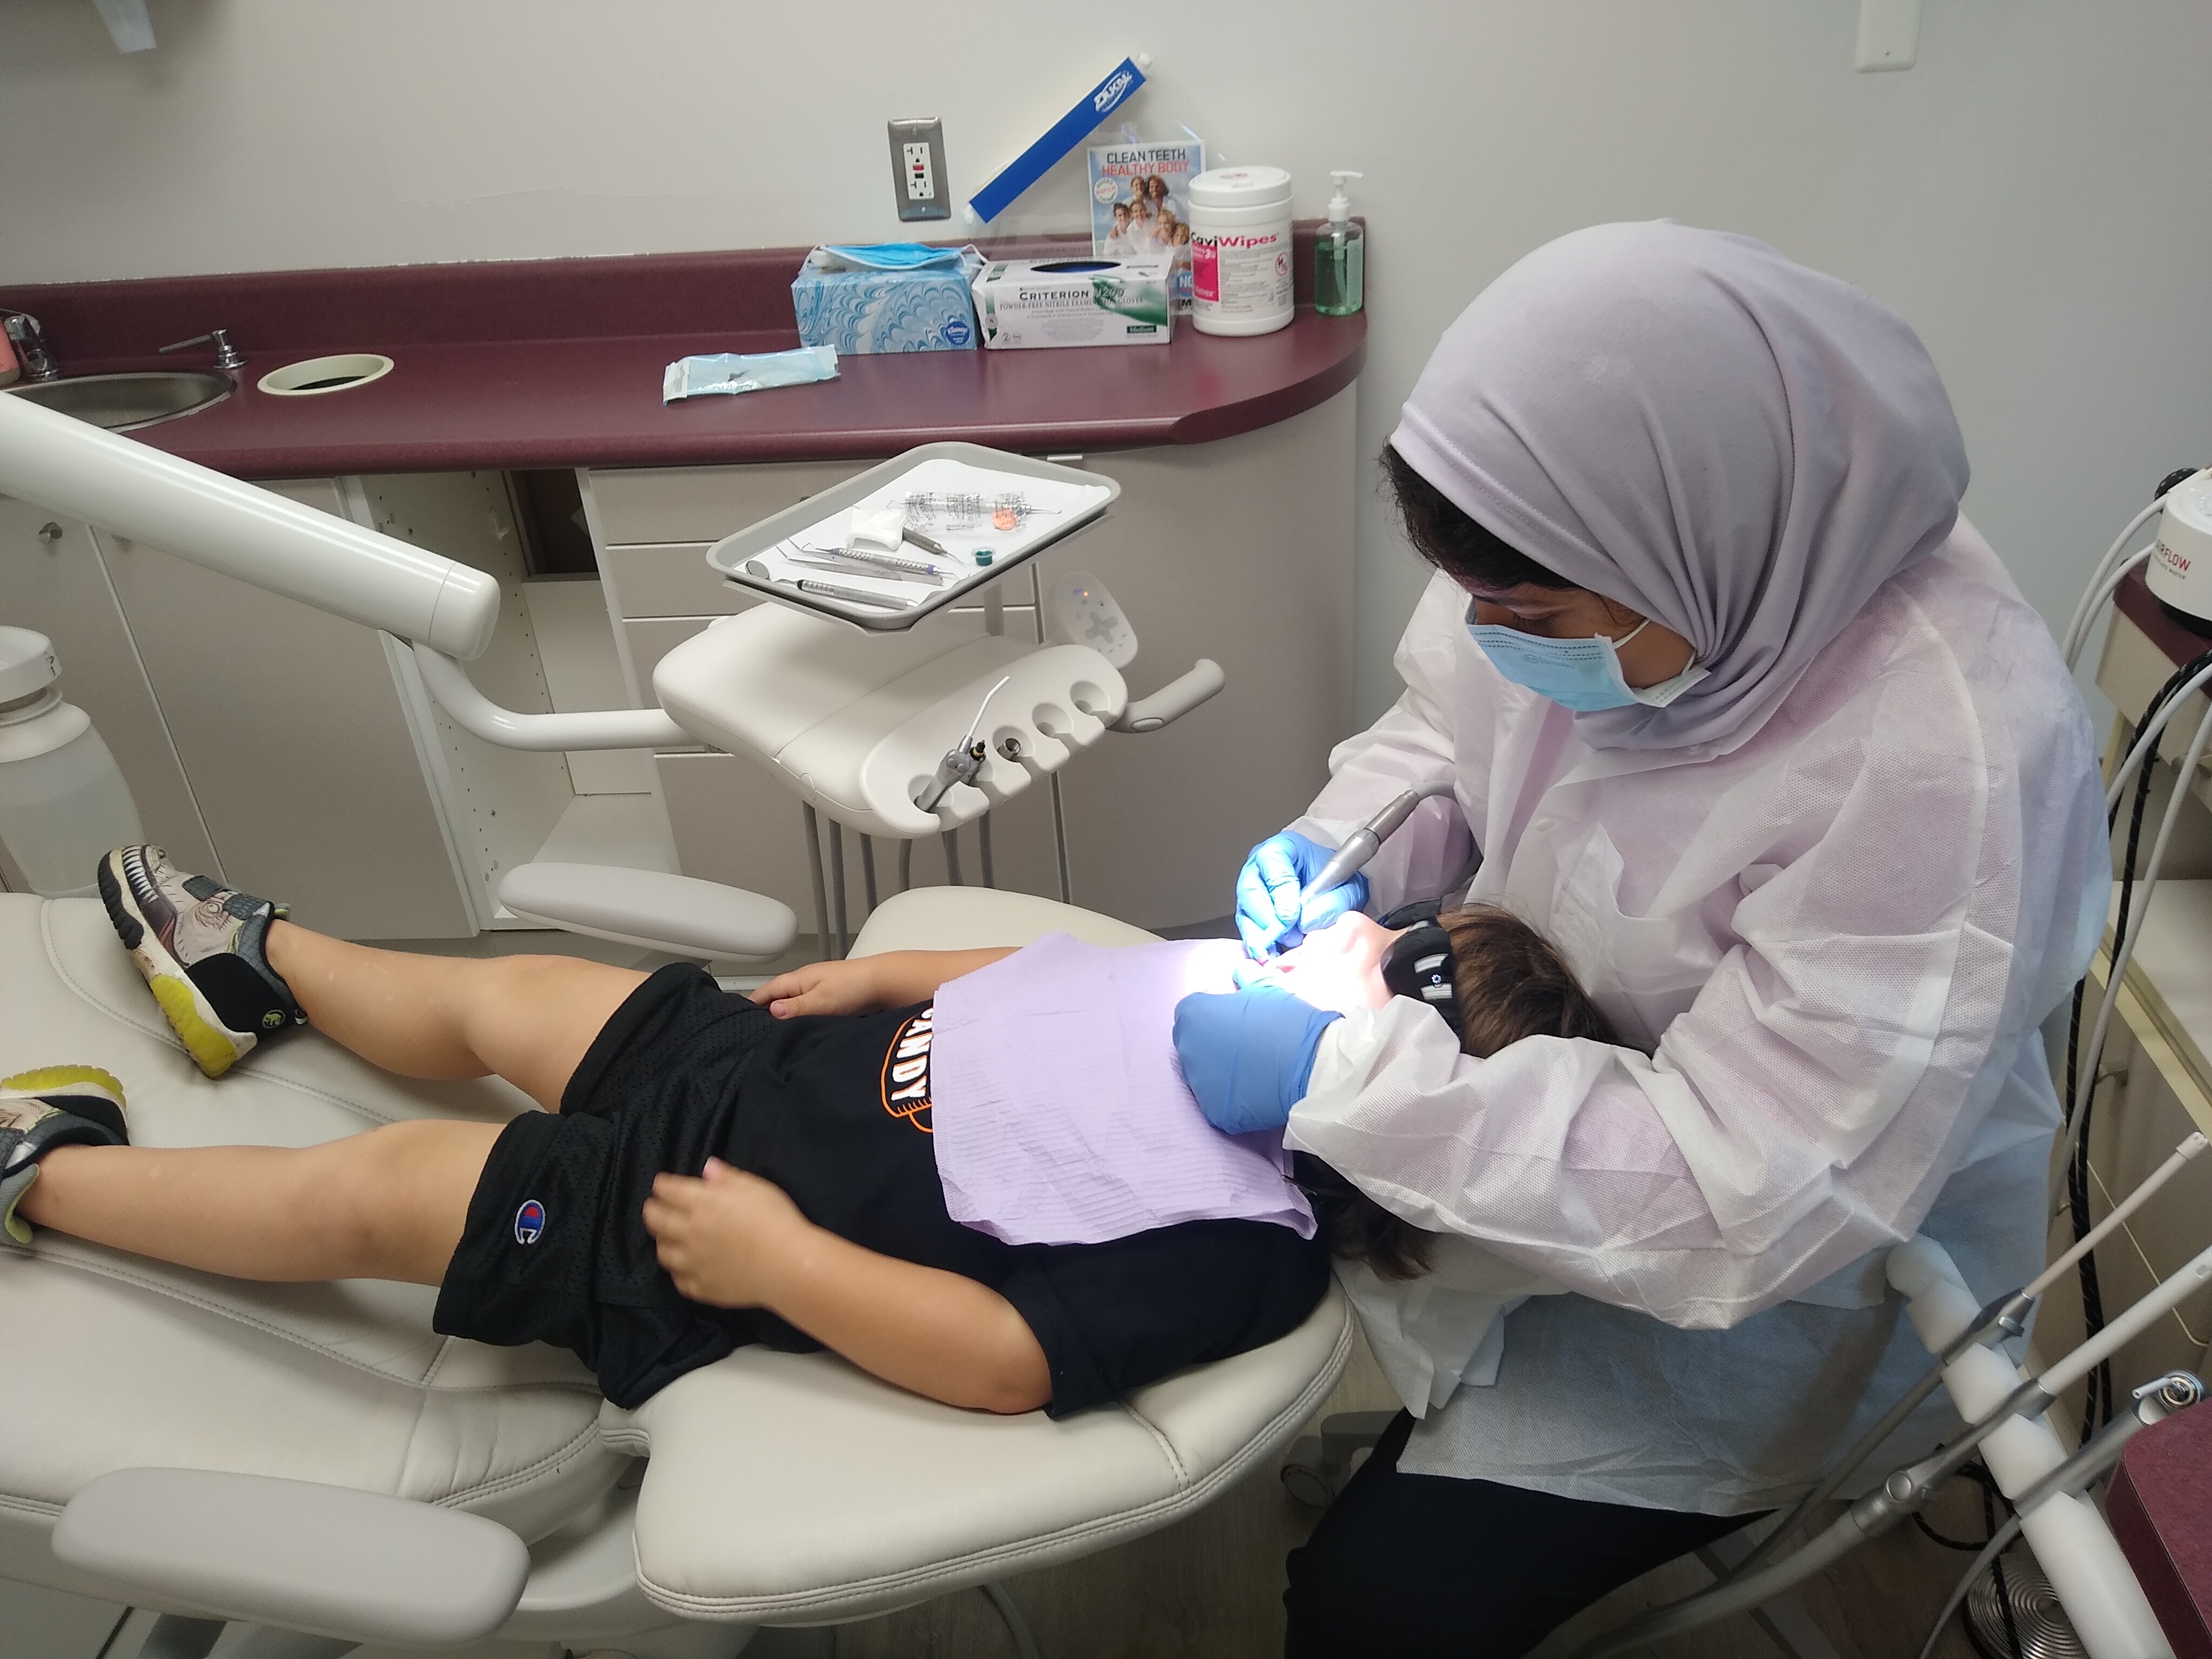 Kenny getting his teeth cleaned! He loves Dr. Ismail!